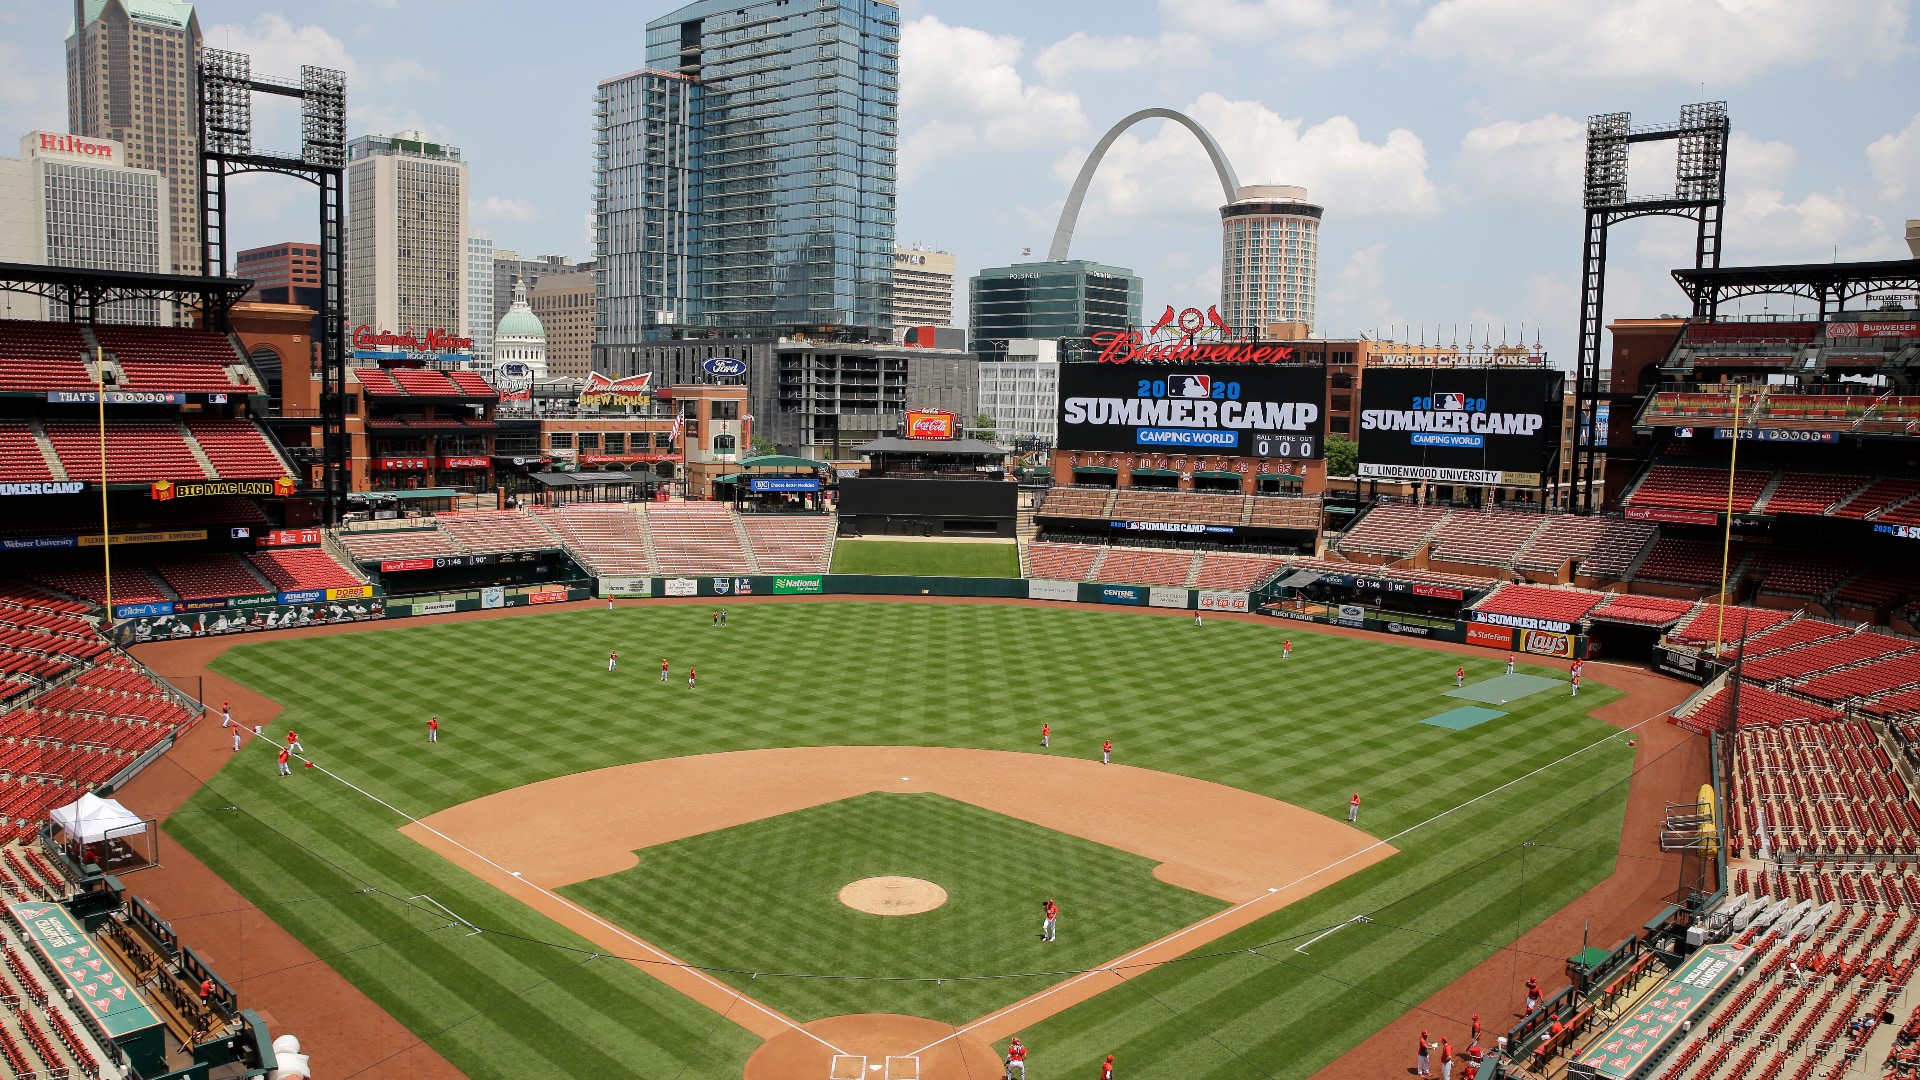 The start of the 2024 St. Louis Cardinals season is getting closer and hiring is still underway for ushers and game-day attendants.